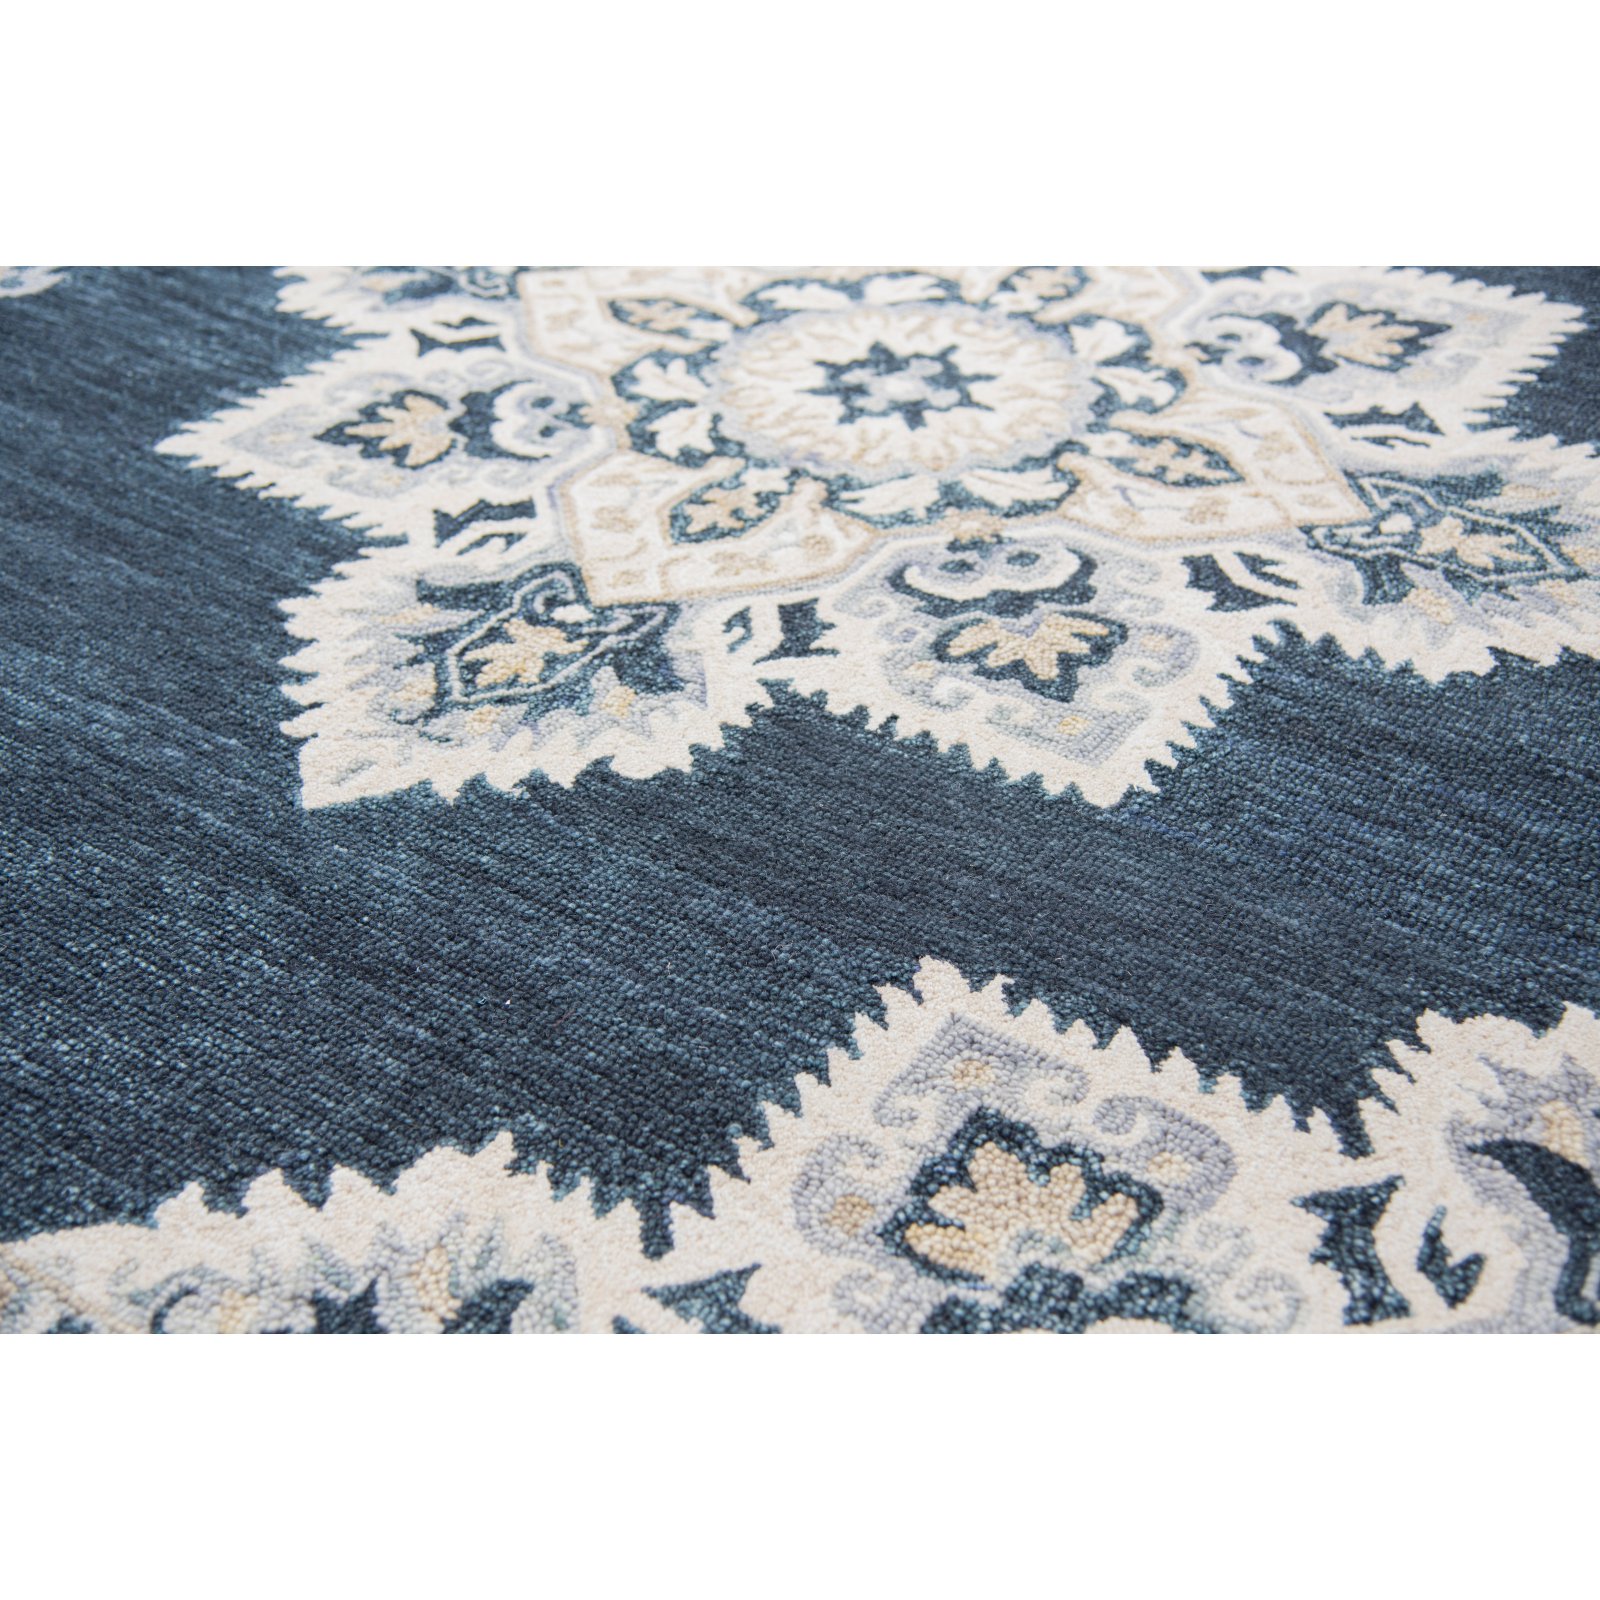 Rizzy Home RS070B Dark Blue 2'6" x 8' Hand-Tufted Area Rug - image 4 of 6